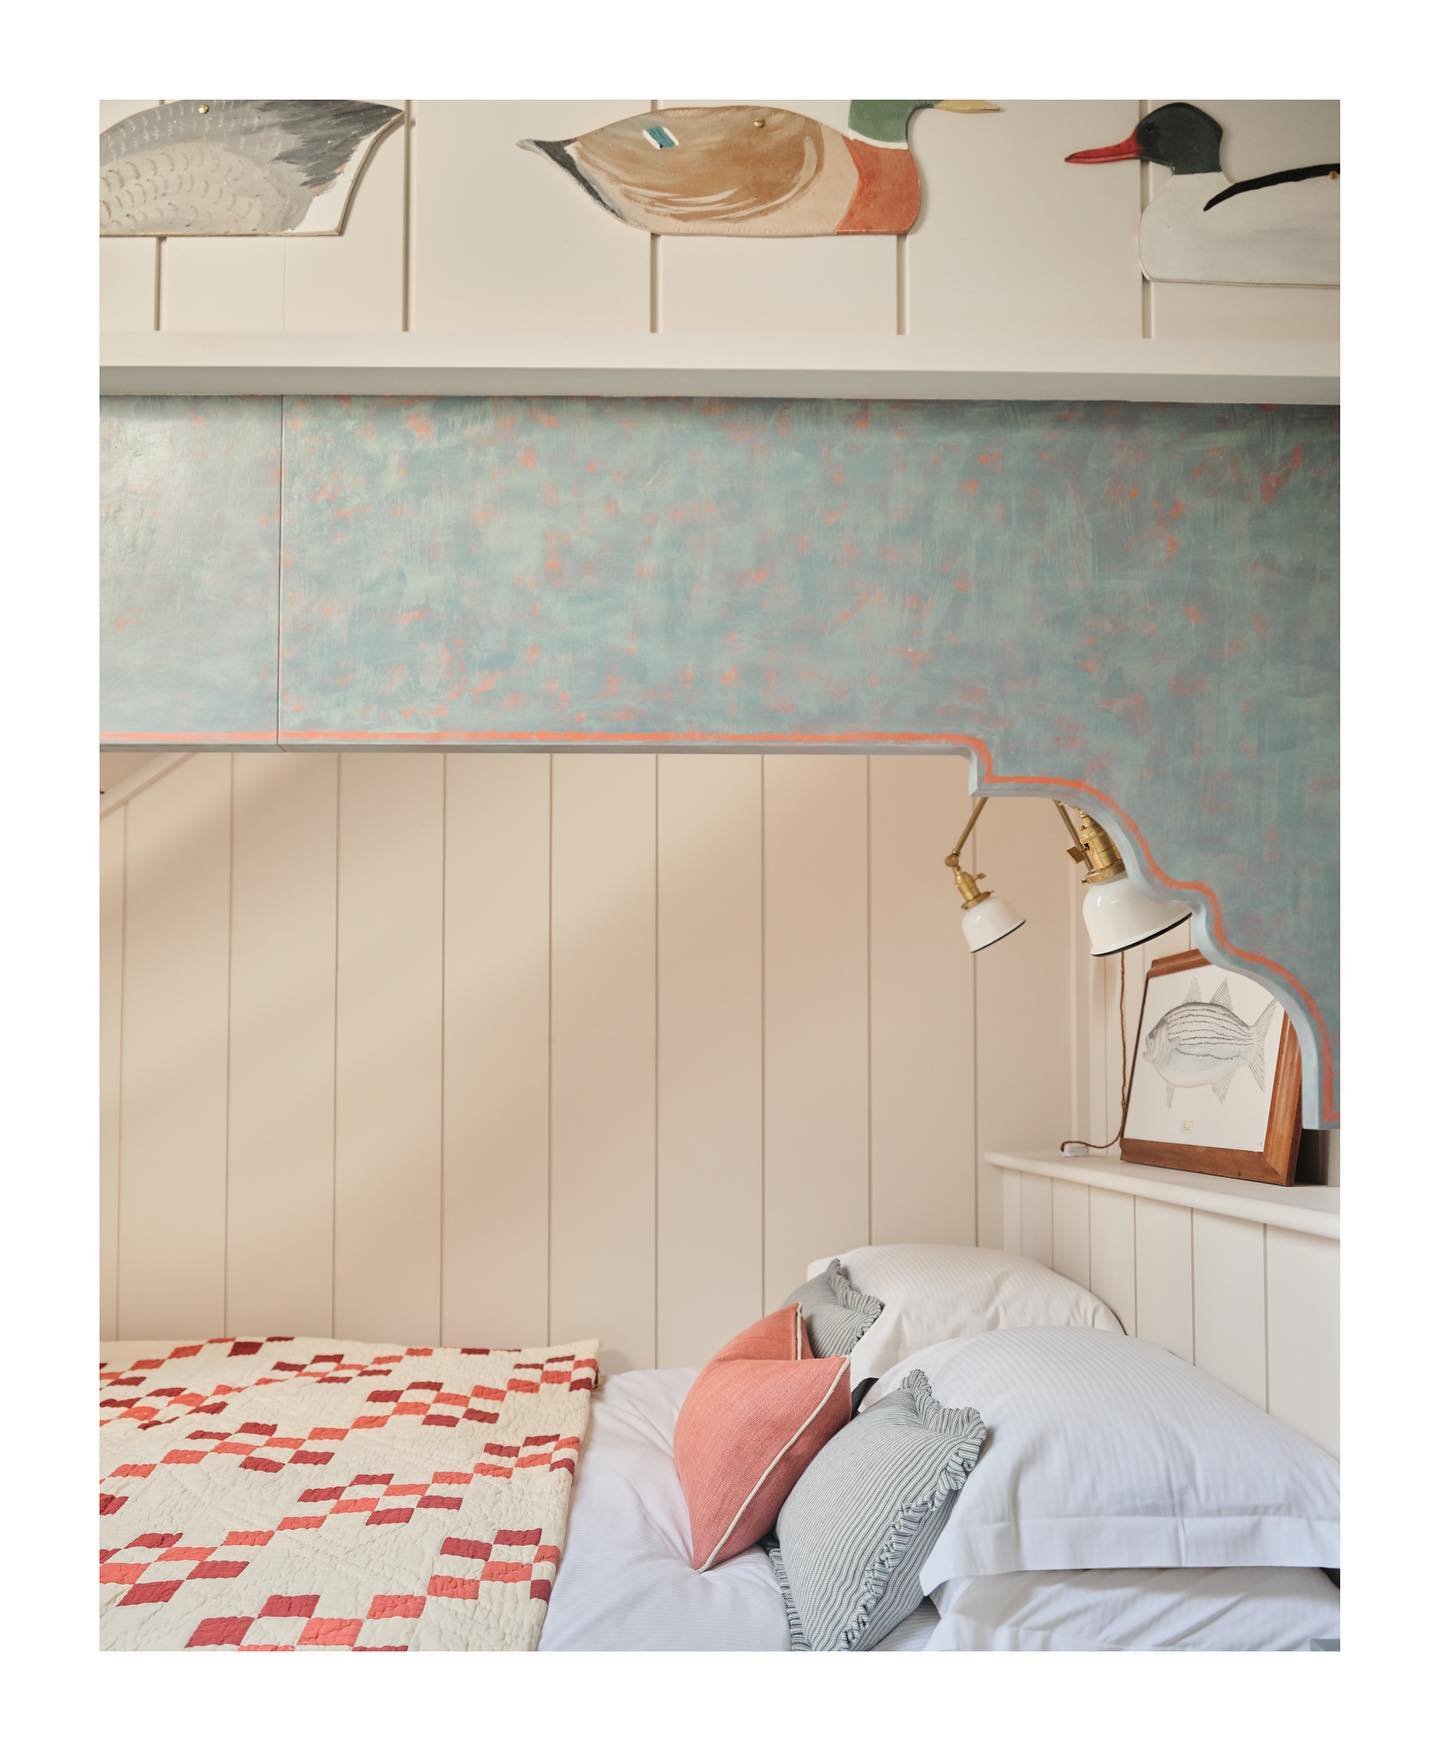 Often labelled as Cornwall&rsquo;s chicest bolt hole, @atlantatrevone sits in one of the UKs most sought-after coastal locations. Interiors in the design-led Net Loft are Hamptons beach house meets warm @fermoie fabrics, antique furnishings and a sta